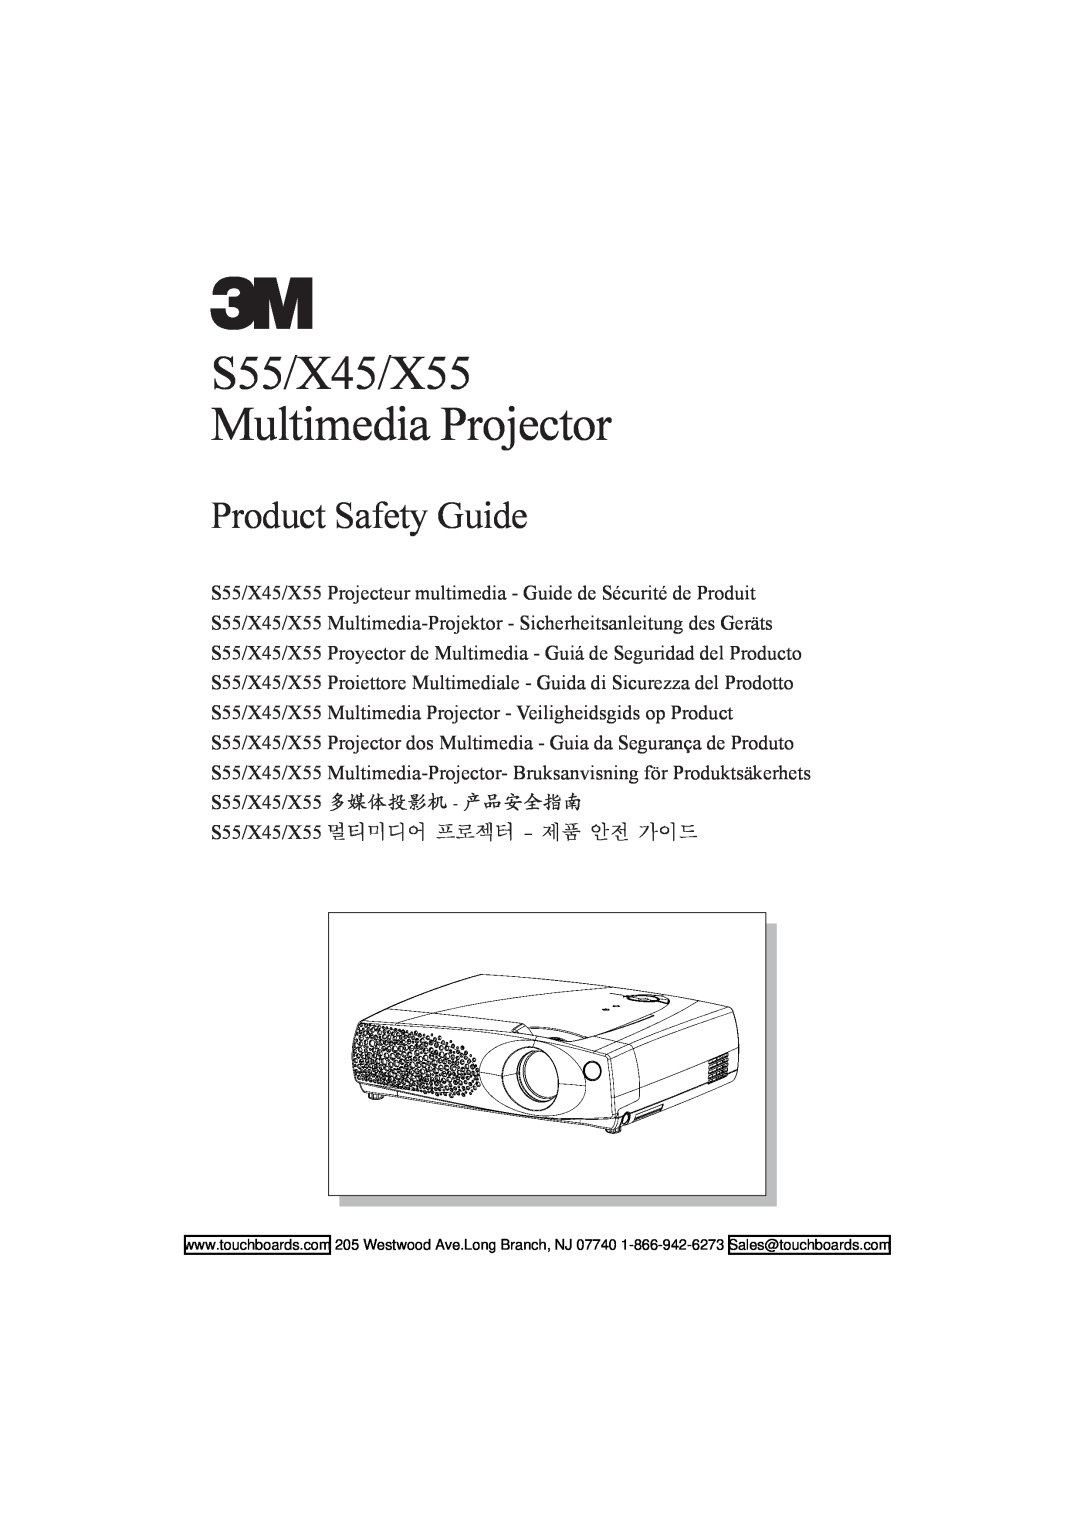 3M manual About this manual, Thank you for purchasing this projector, S55/X45/X55, Multimedia Projector Operators Guide 